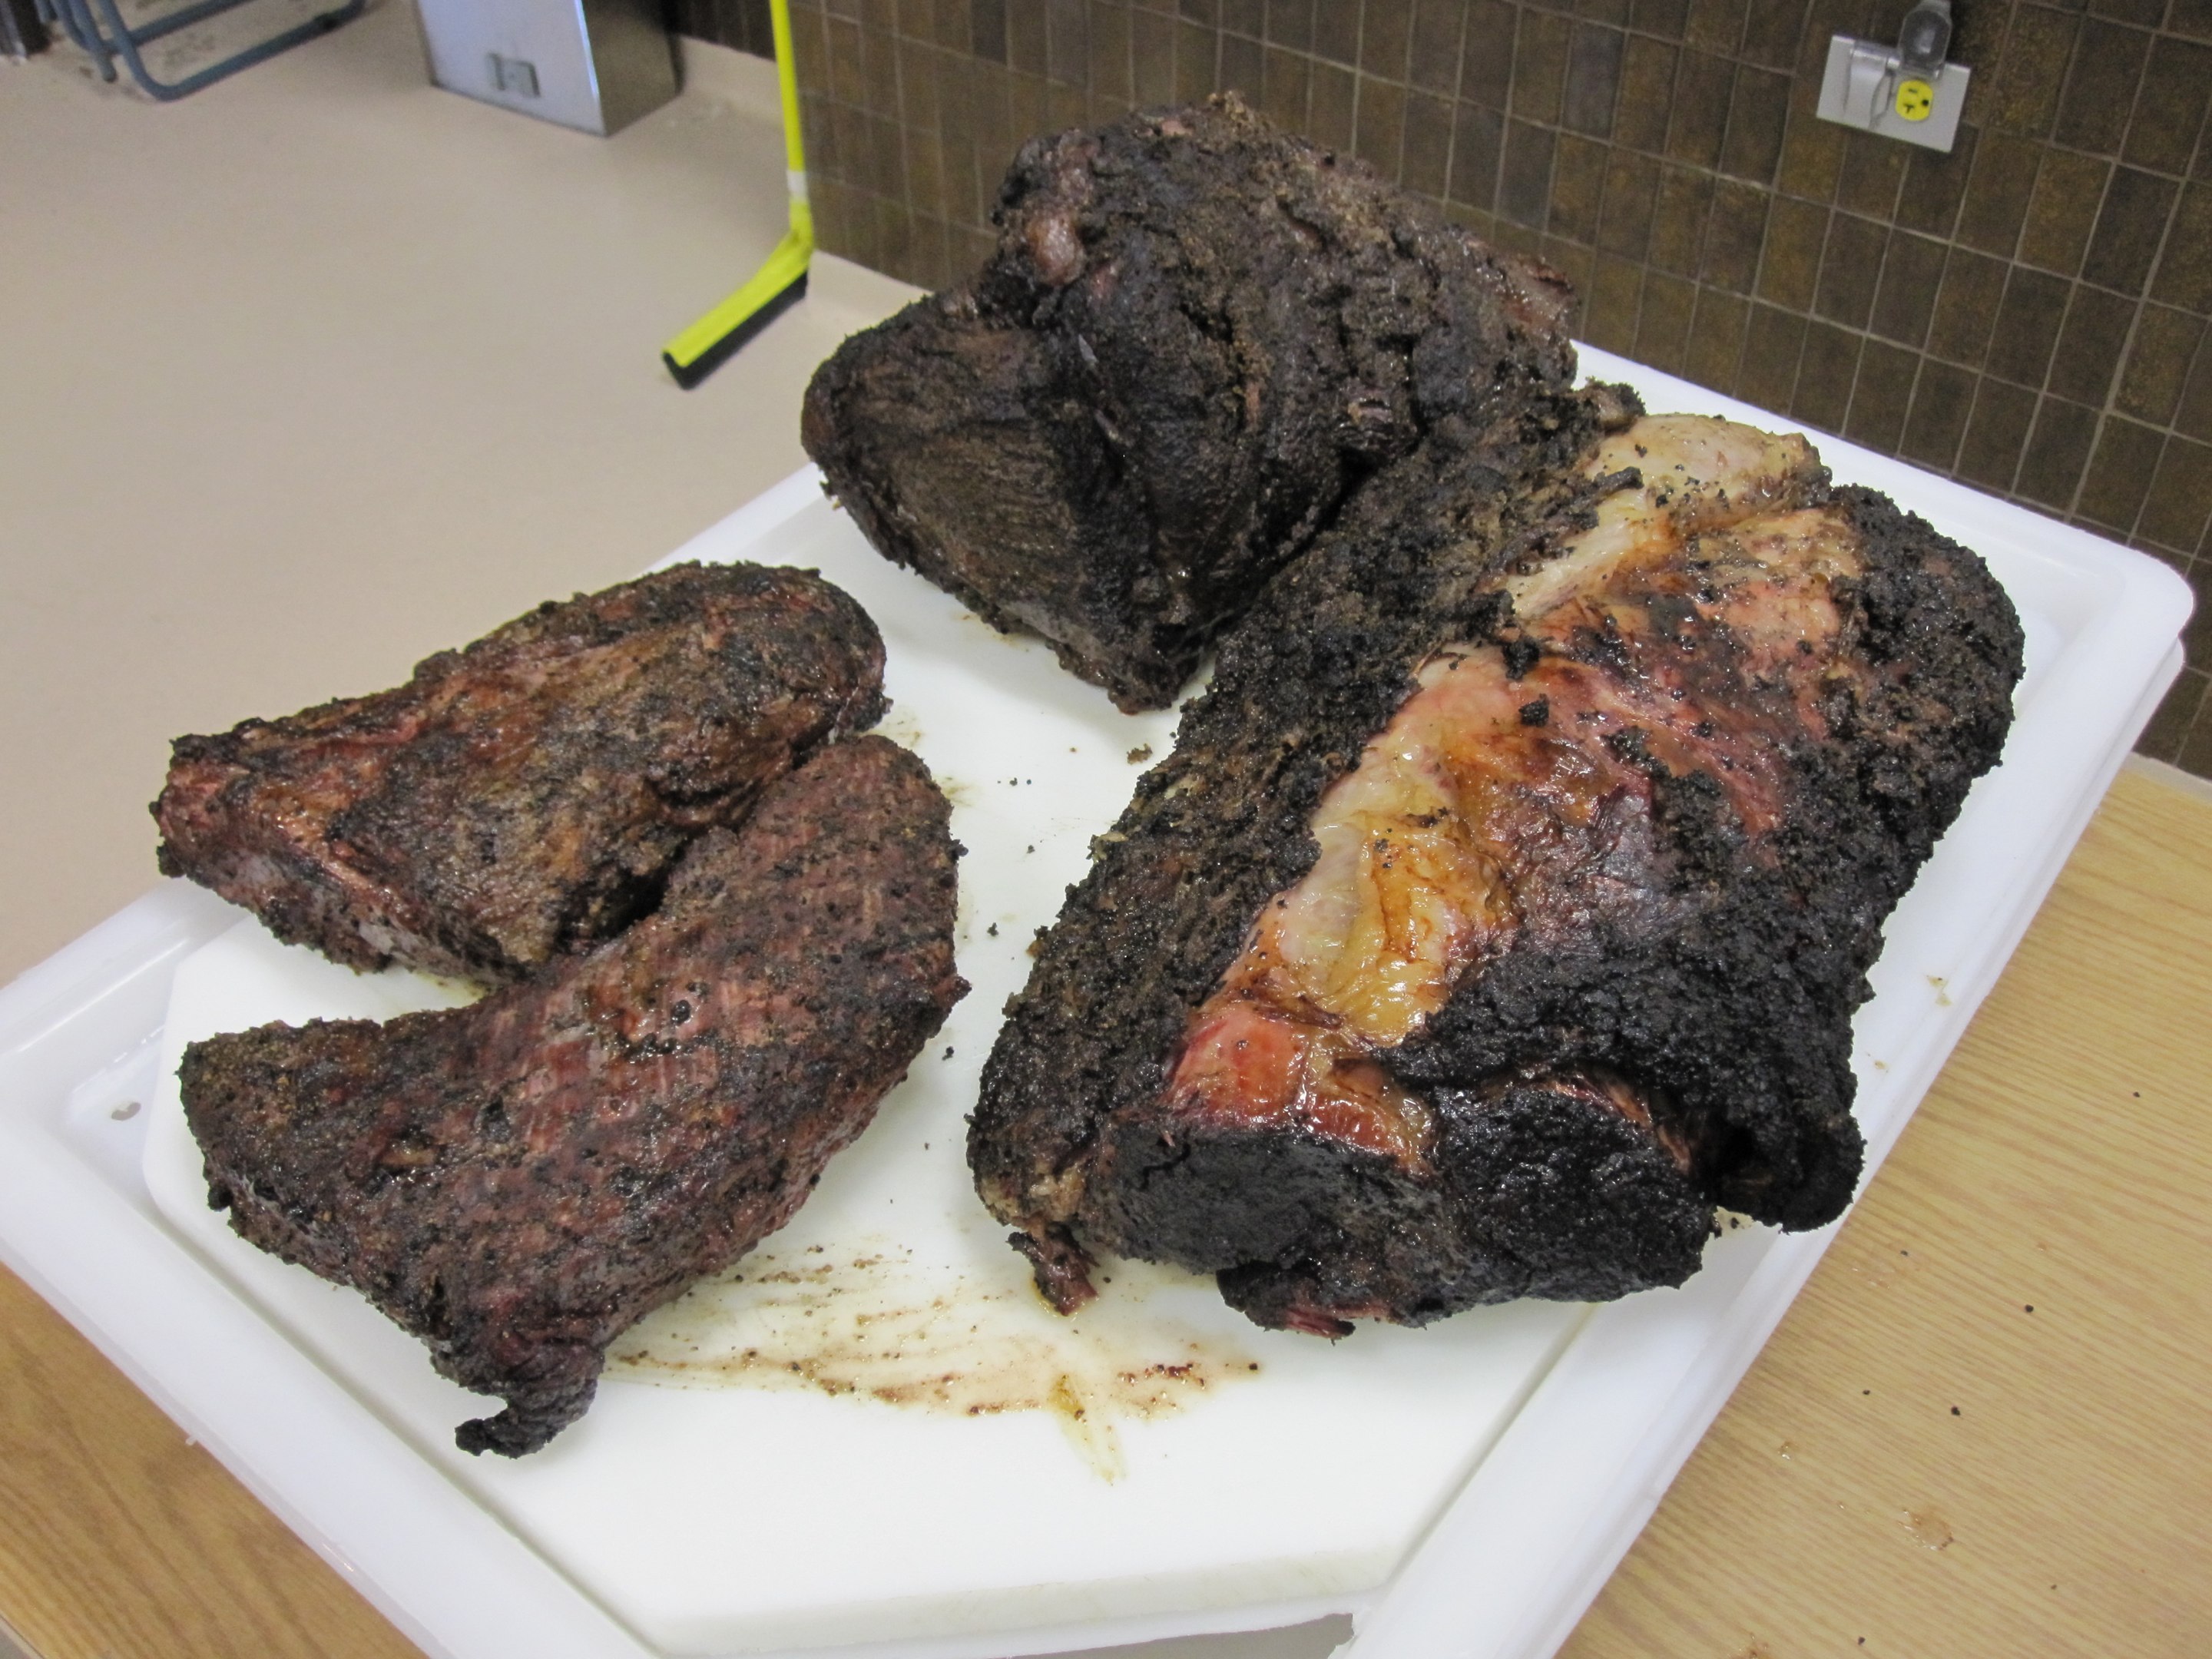 Displaying different cuts of BBQ beef